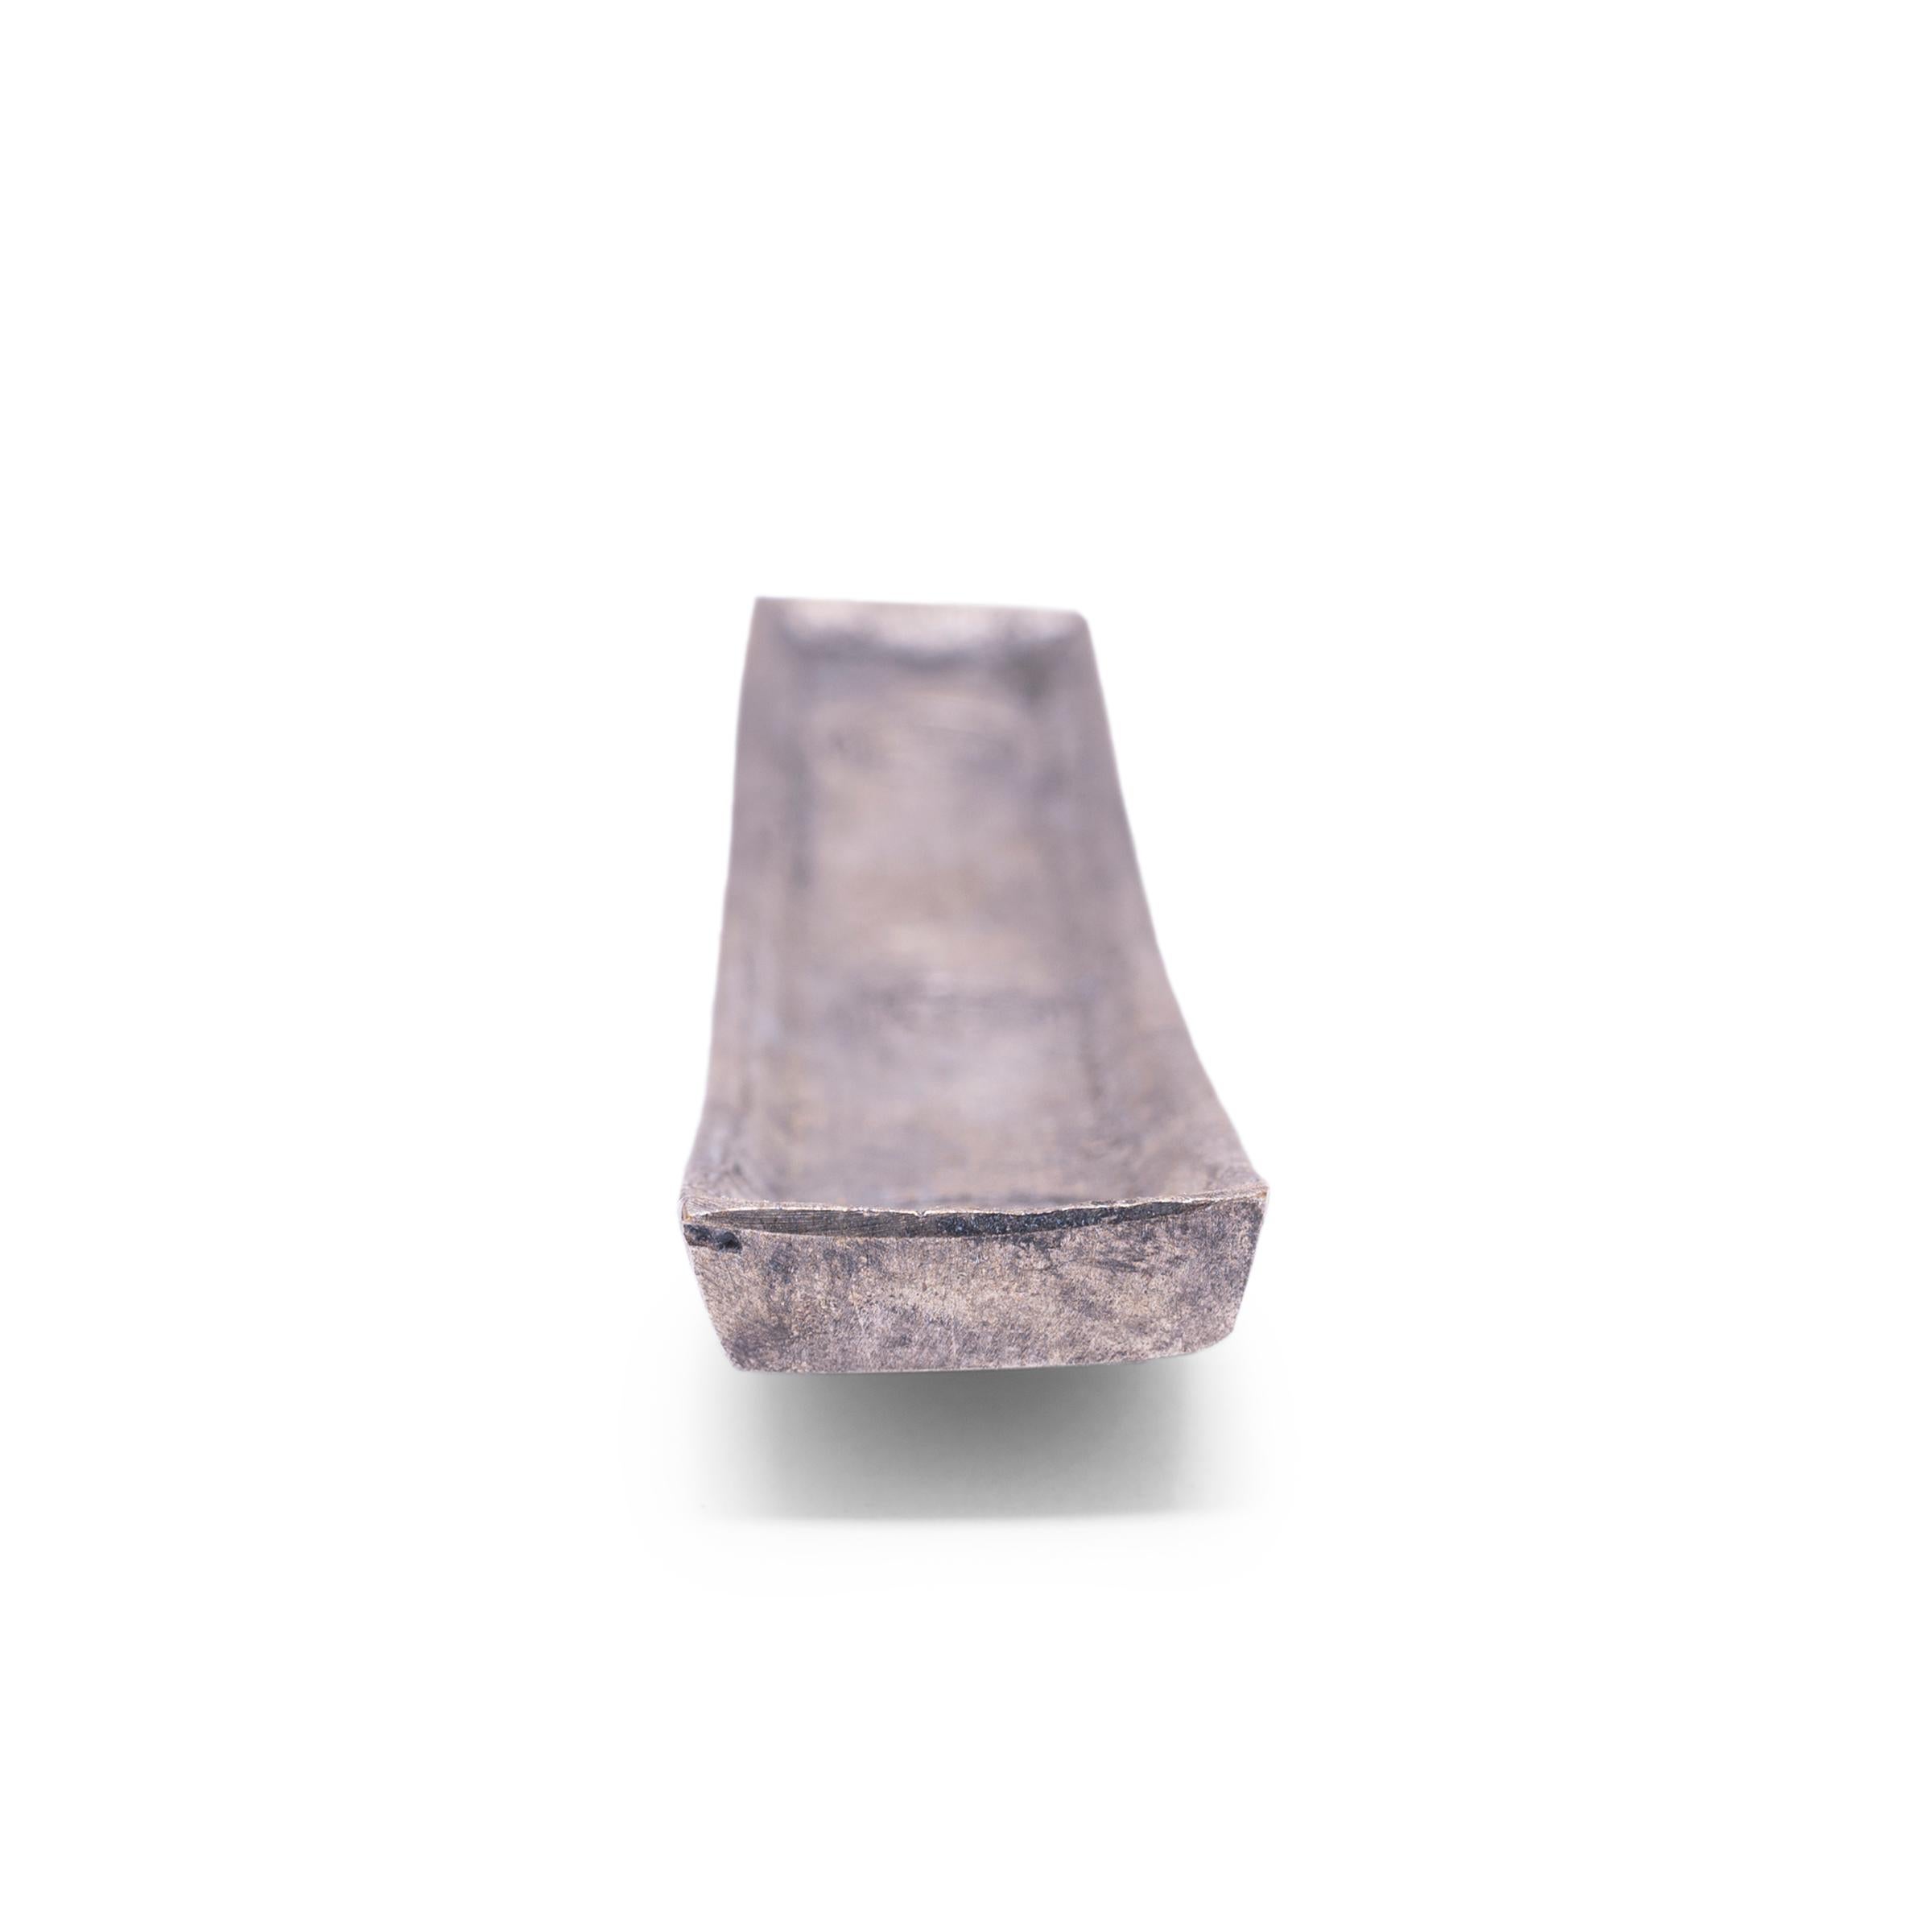 Lao Stamped Silver Ingot, c. 1950 In Good Condition For Sale In Chicago, IL